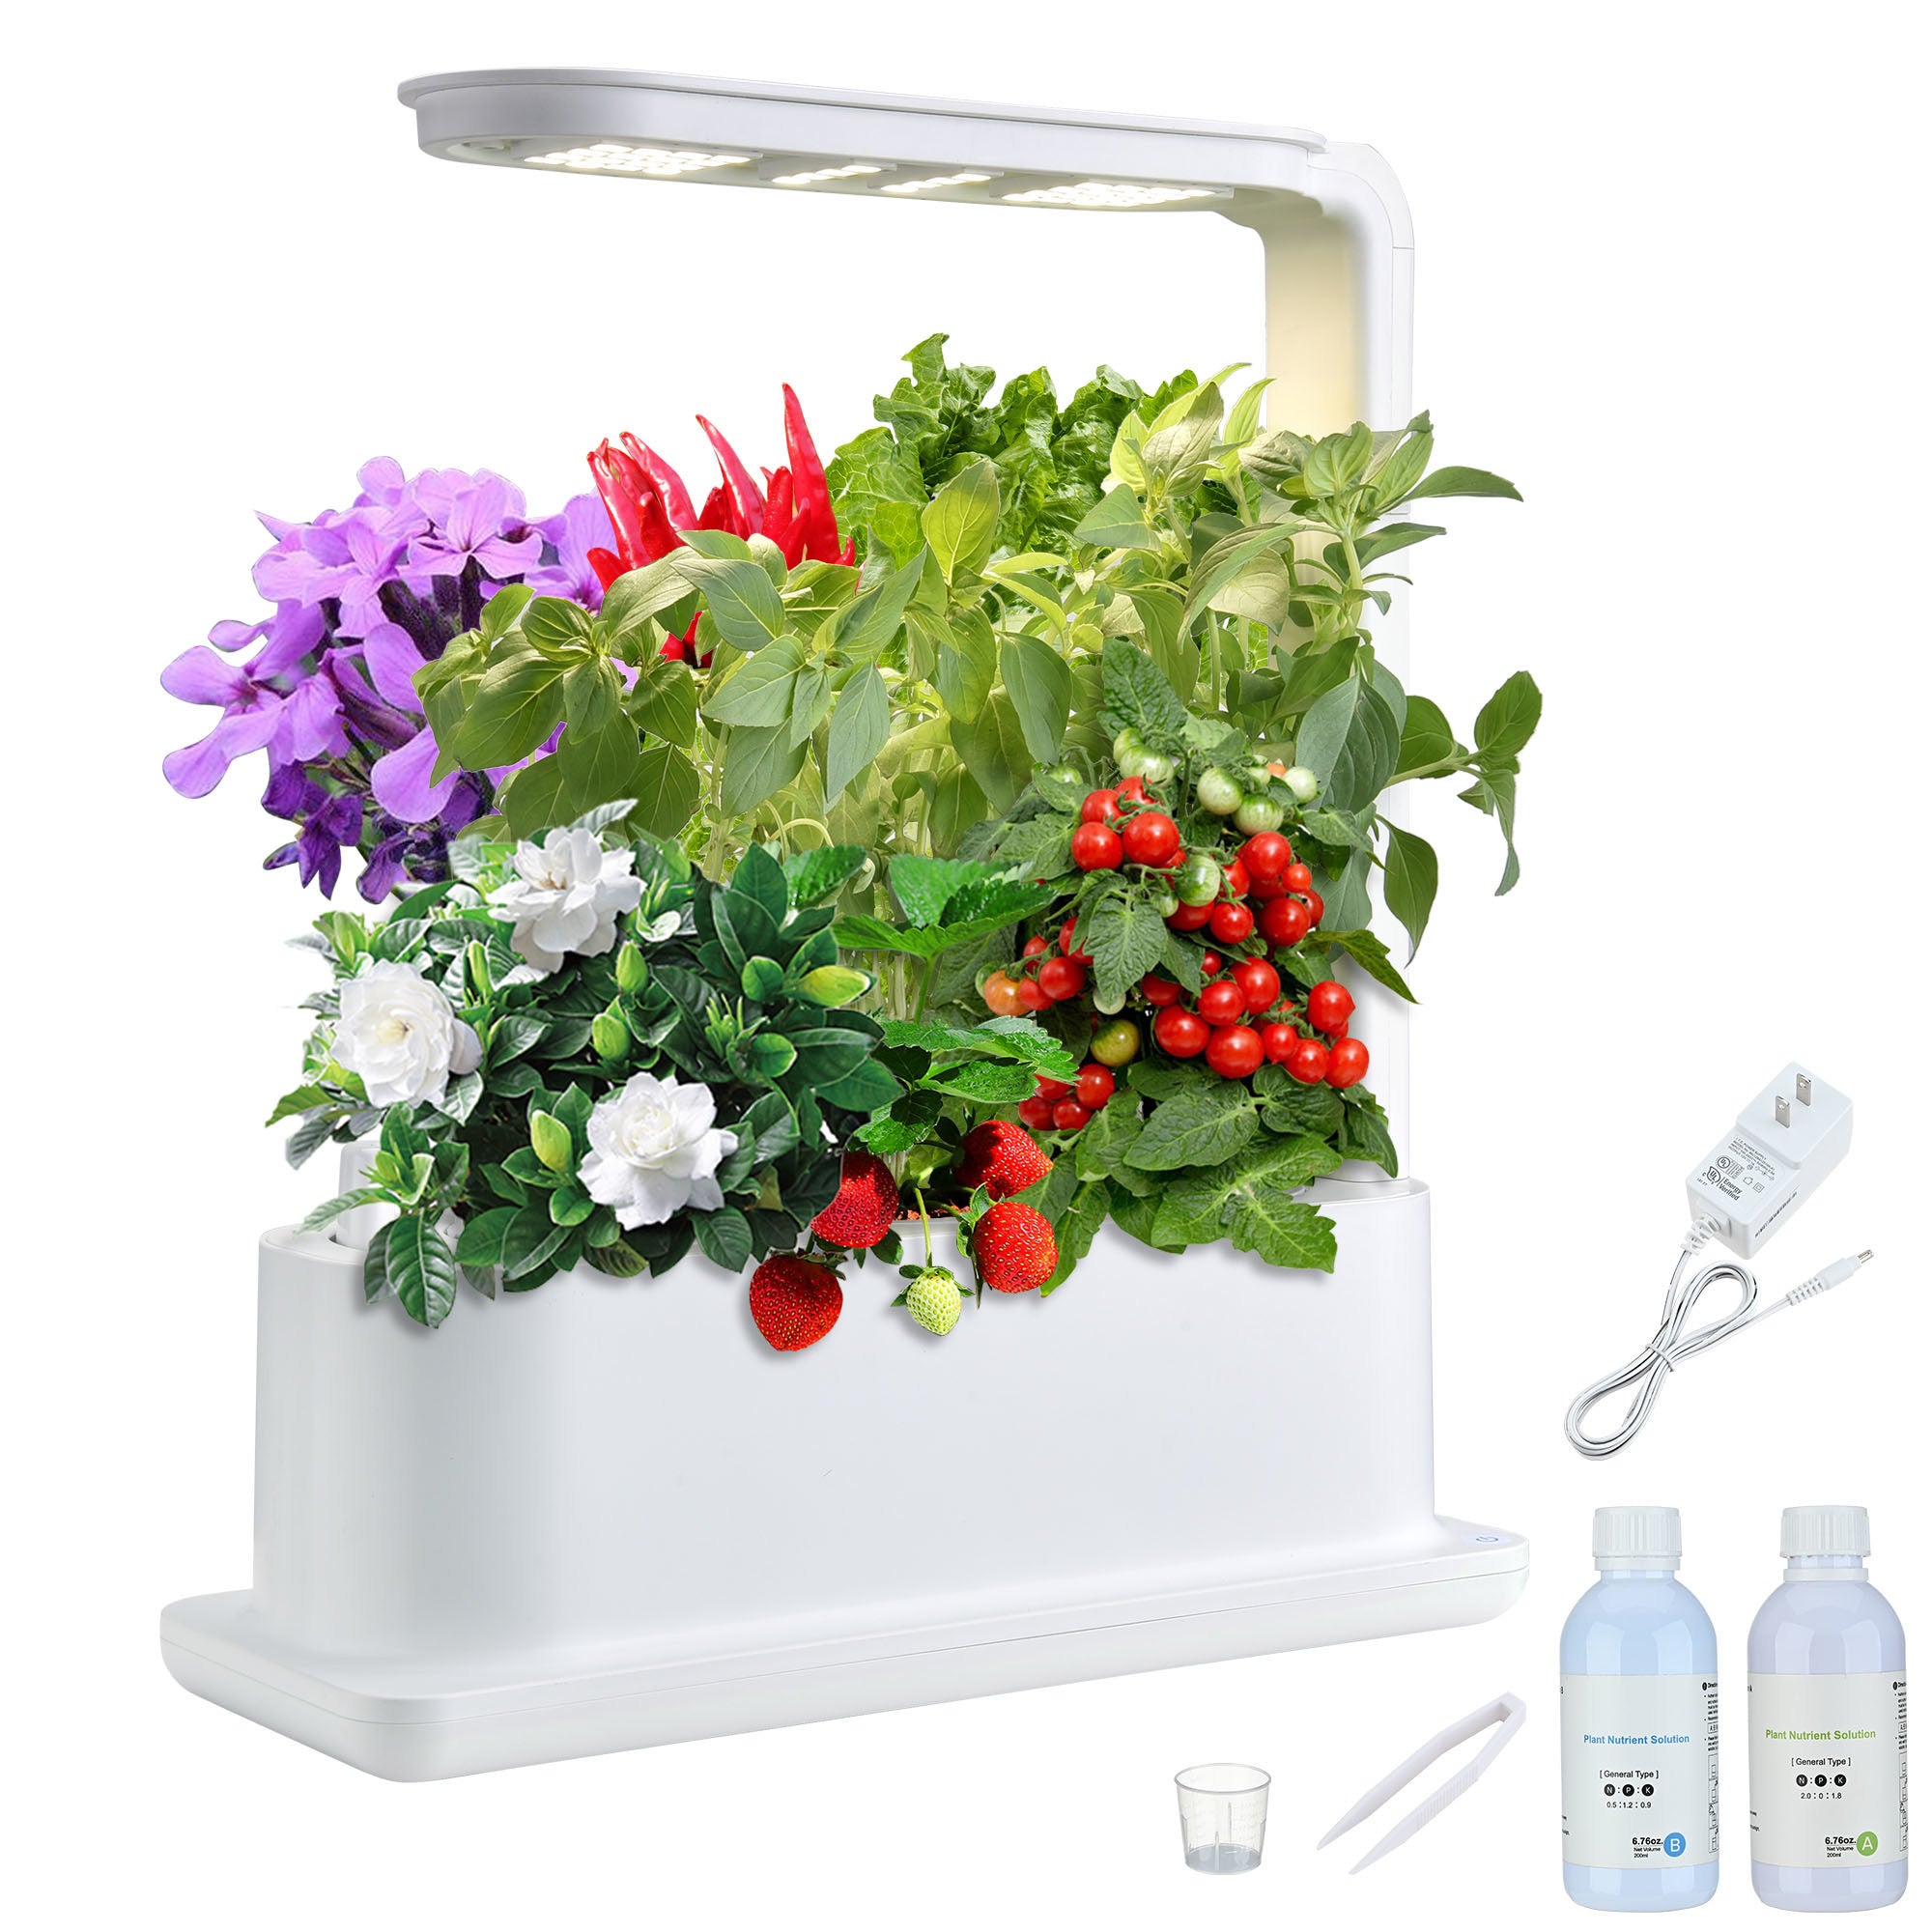 3-Pot Hydroponic Growing System with LED Grow Light | Easy to Operate | Soil-Free Indoor Gardening | Grow Fresh Herbs, Vegetables, and Flowers